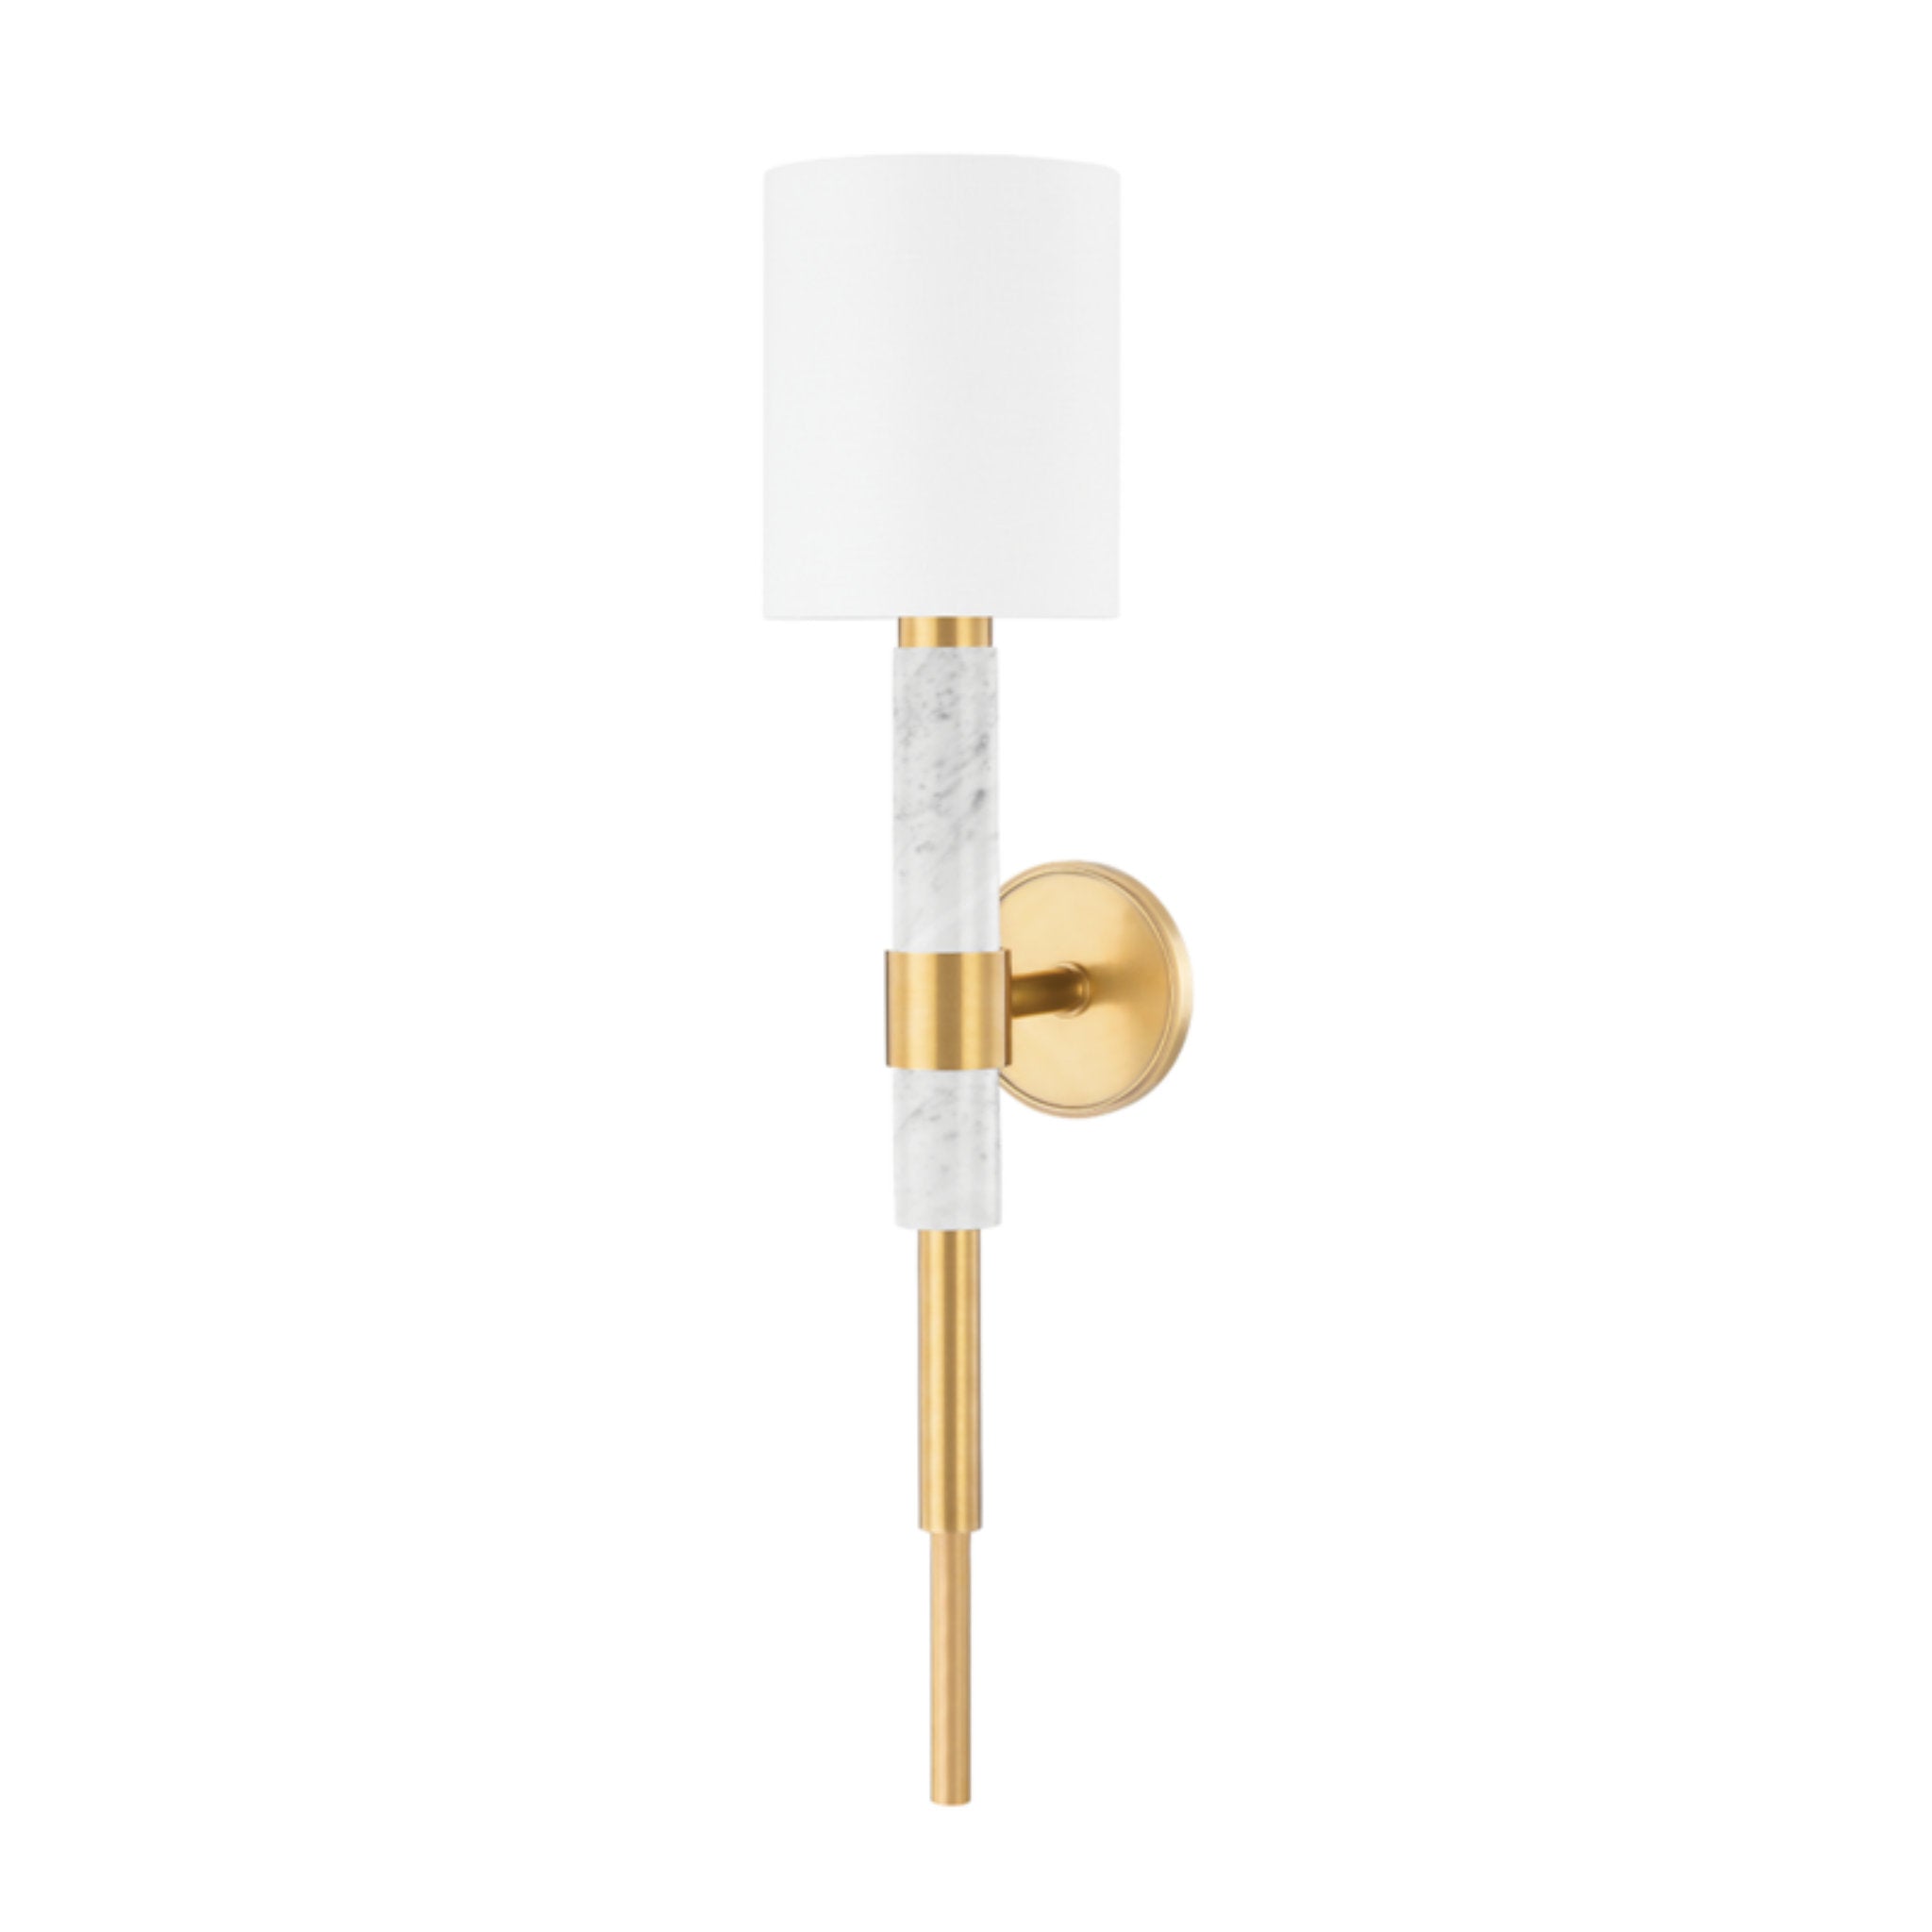 Solstice 1 Light Wall Sconce in Vintage Brass & White Marble